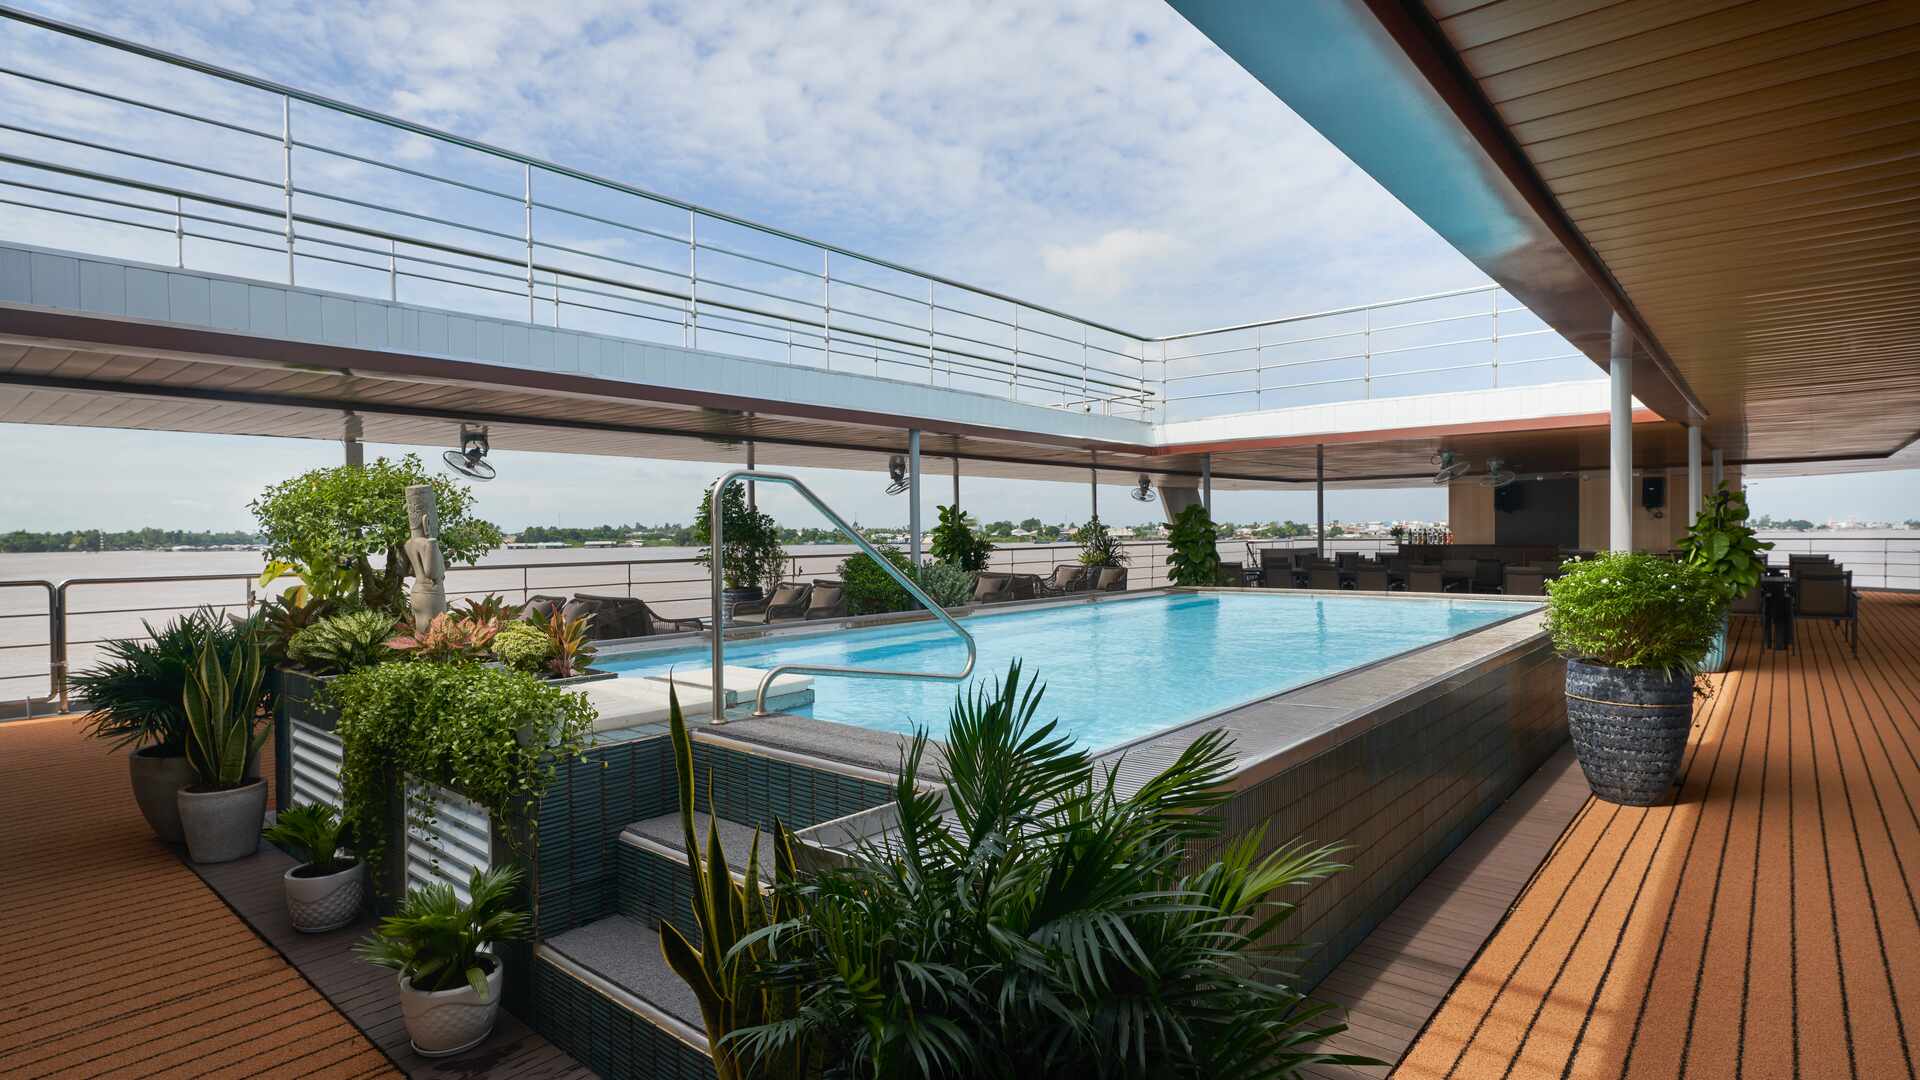 Pool view of the Mekong Serenity